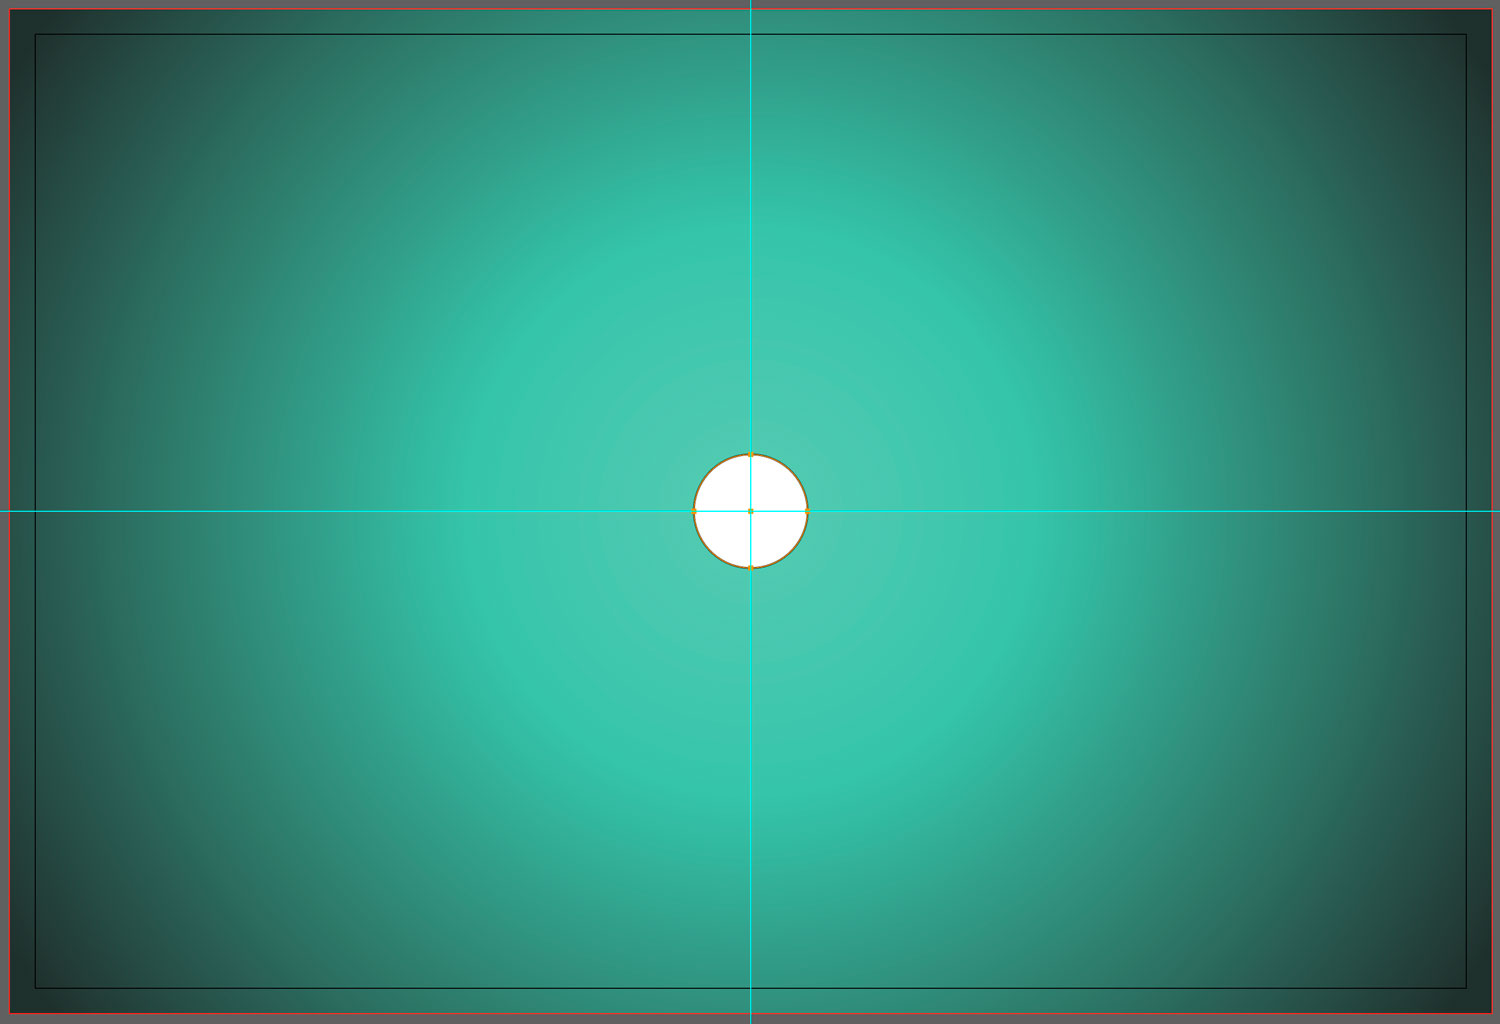 White circle on a green gradient background